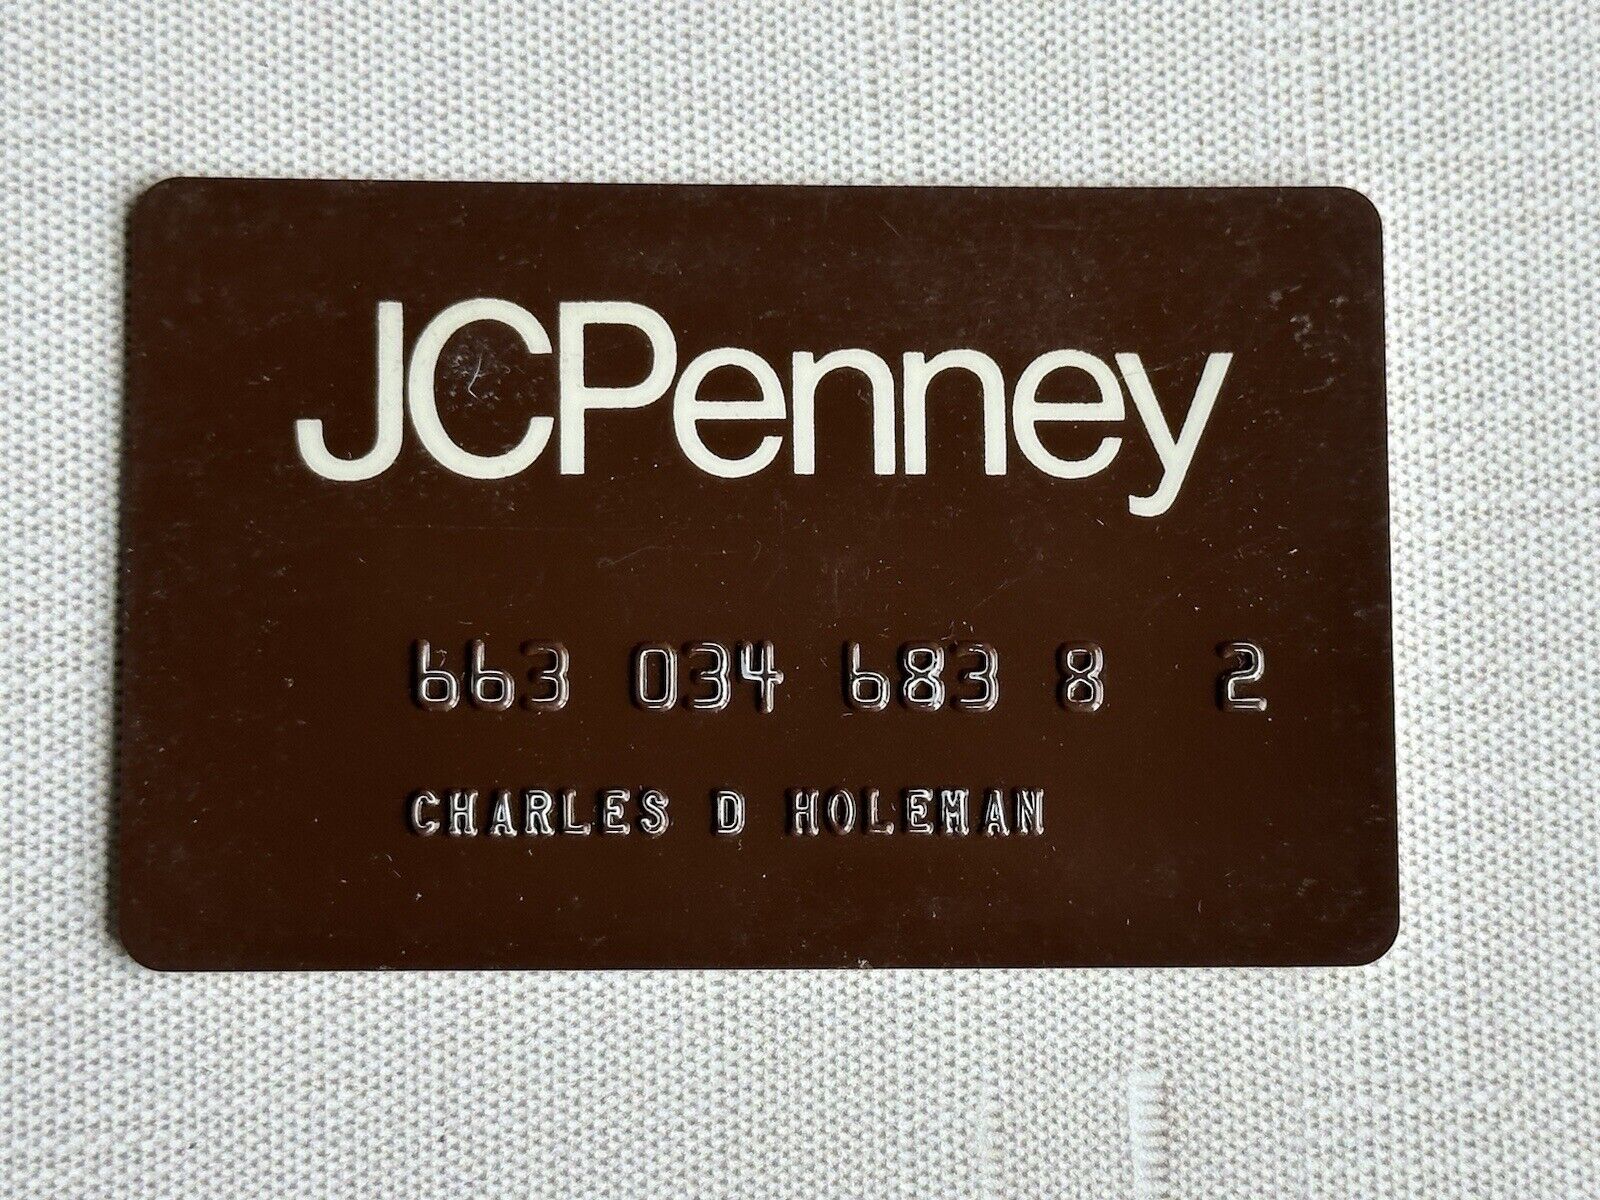 JCPENNY  DEPARTMENT STORE MEMBERSHIP CARD VINTAGE EXPIRED